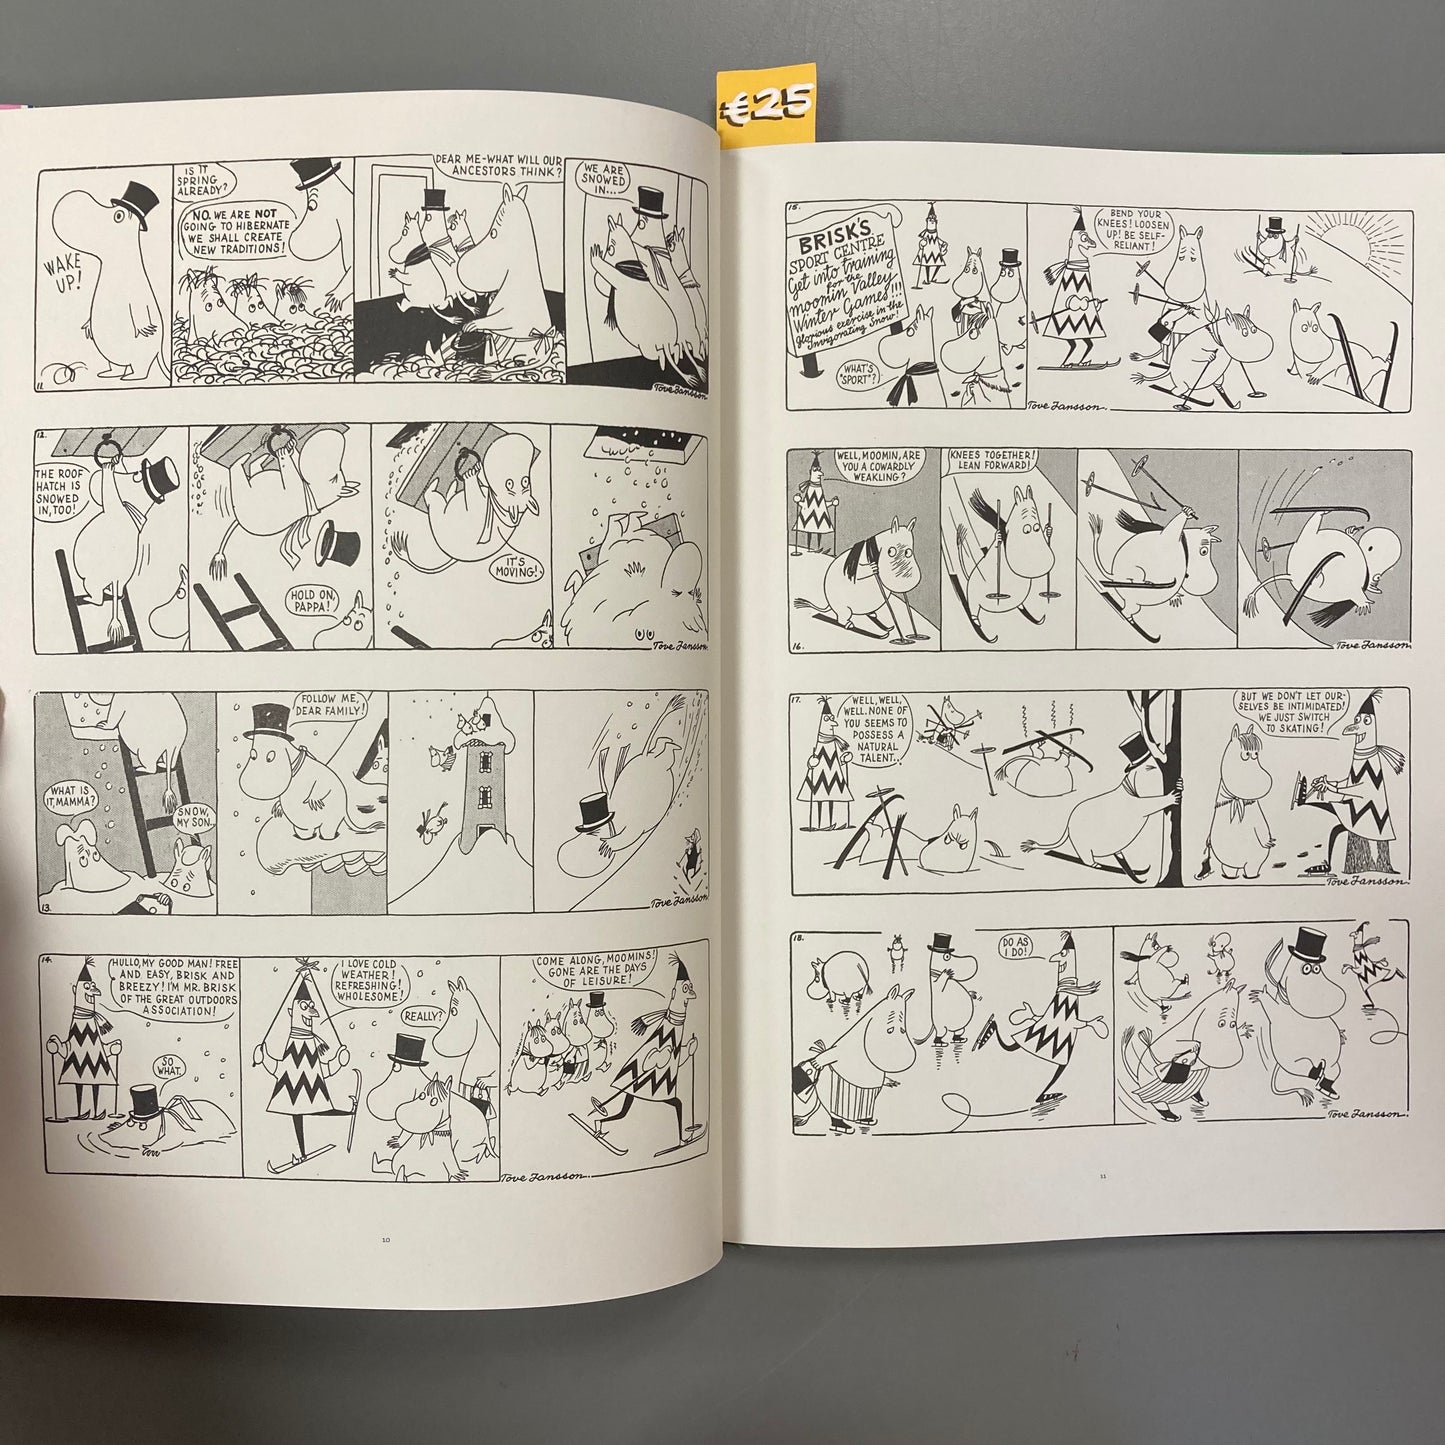 Moomin: The Complete Tove Jansson Comic Strip, Book Two